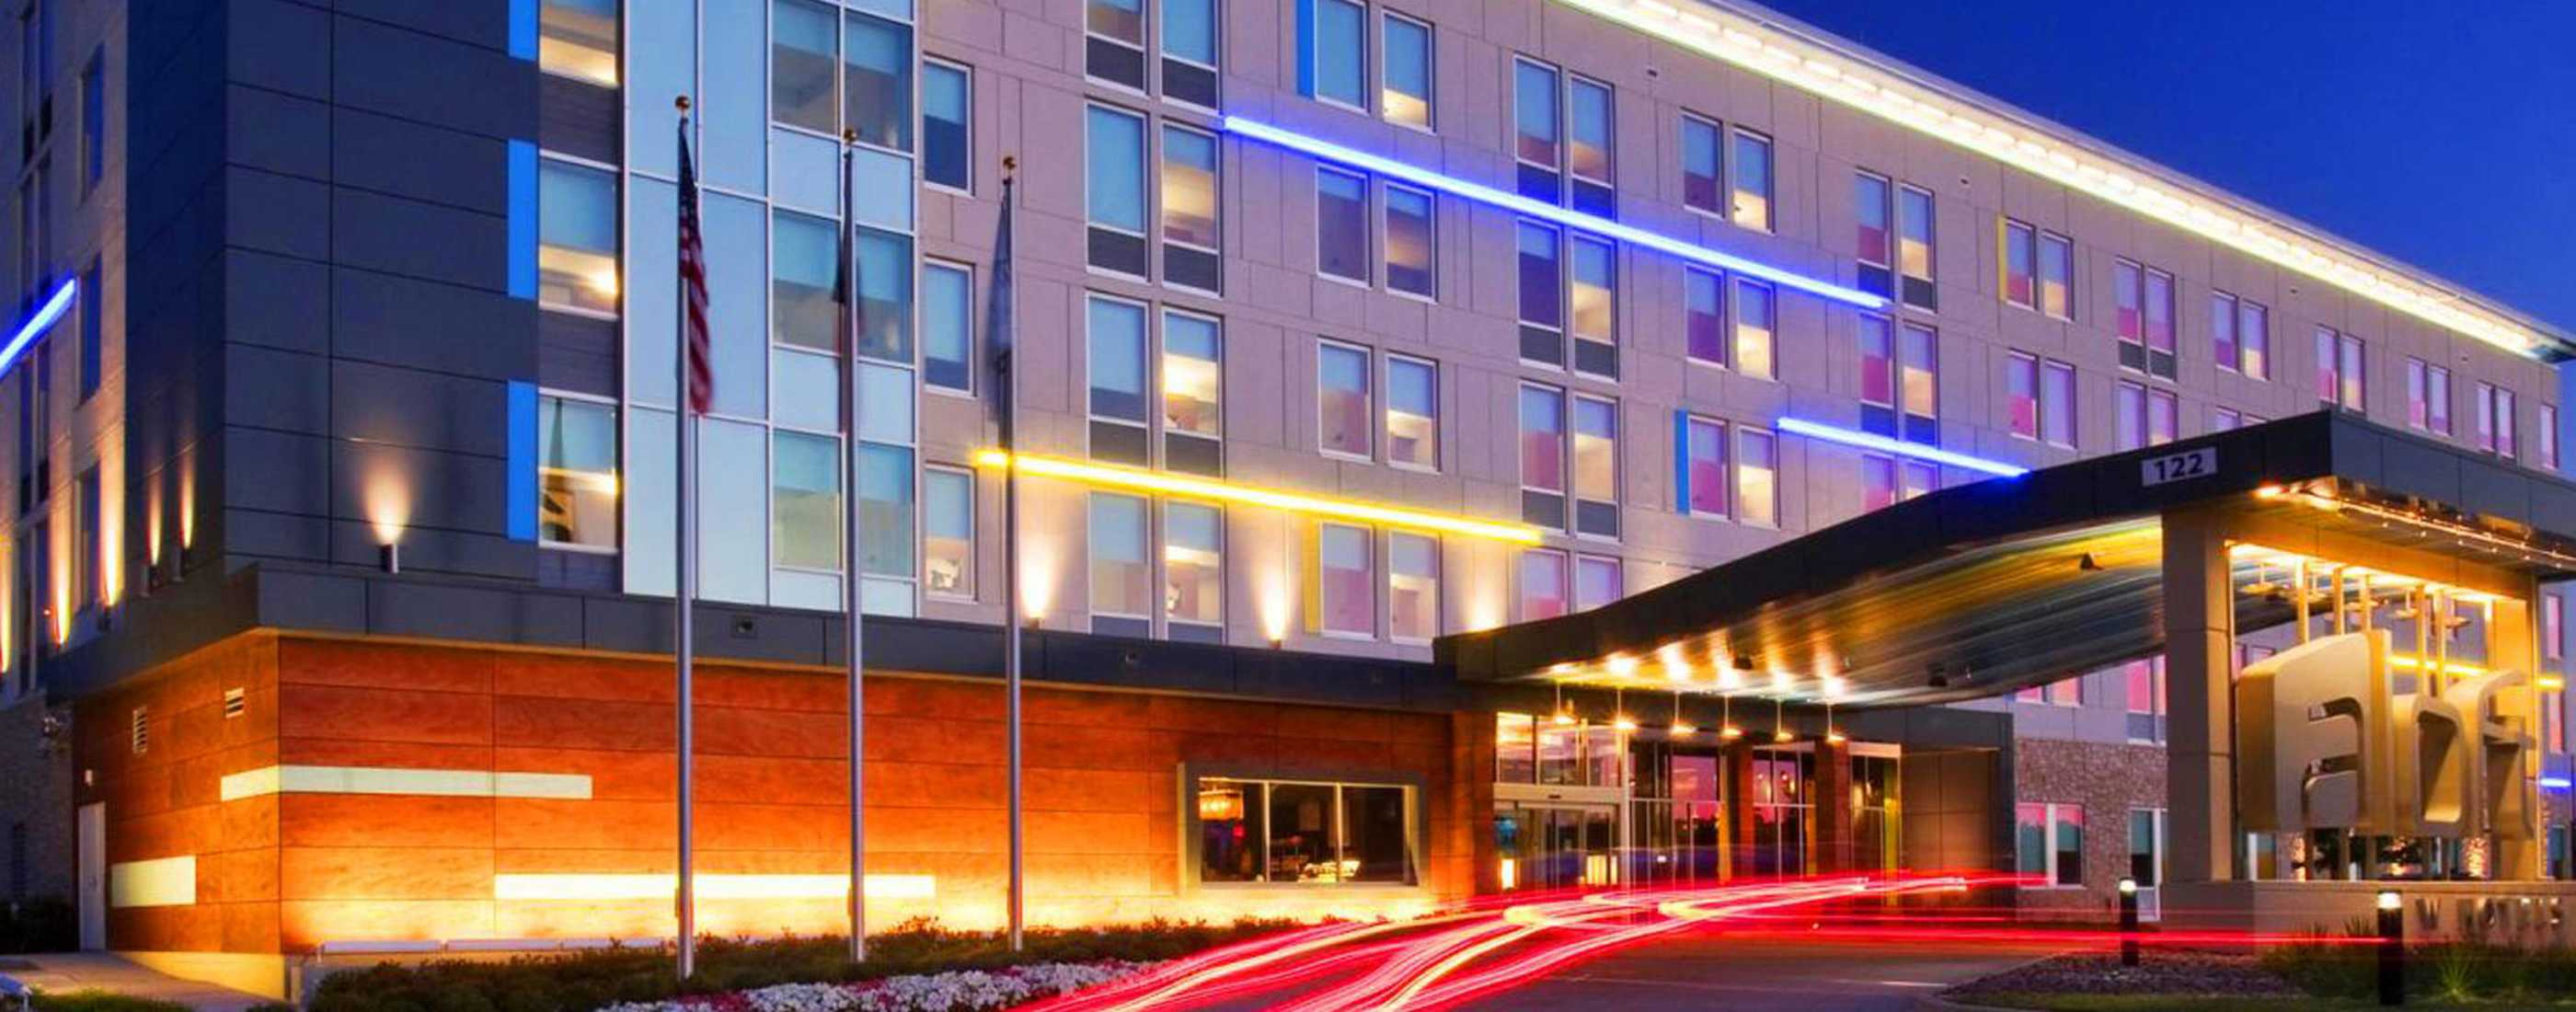 Hotels Near Irving Convention Center | Irving Hotels - Map Of Hotels Near Fort Worth Texas Convention Center